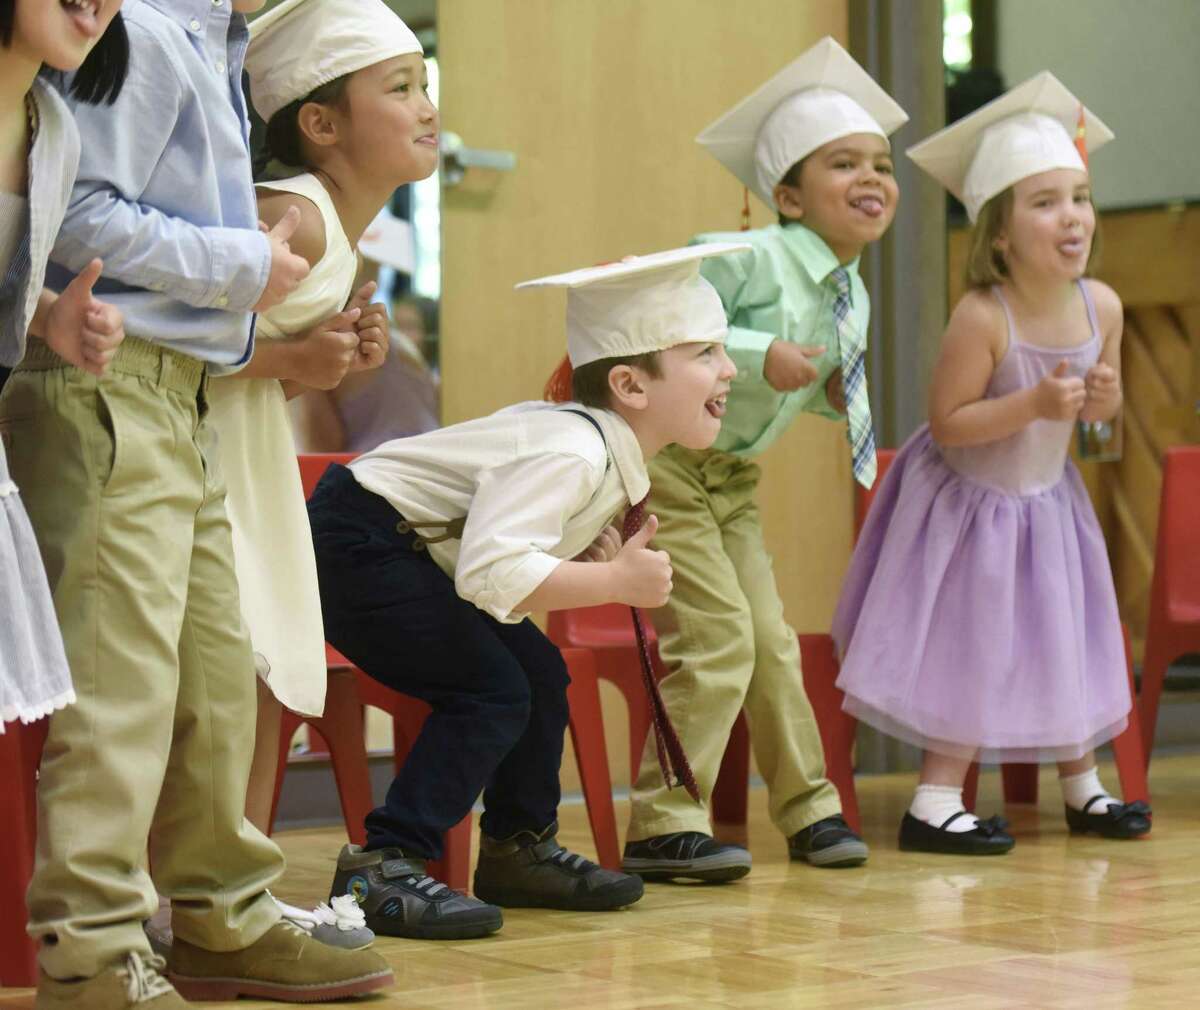 From left, Annemijn Kooyman, Richard Congiu, Brandon Dougherty, and Philippa Haag-Fisk perform a choreographed dance during the Fours Moving Up Ceremony at the YWCA's Steven & Alexandra Cohen Preschool Center in Greenwich, Conn. Thursday, June 22, 2017. A dozen students wore graduation caps and performed song and dance routines in celebration for moving up to the next level at the YWCA.